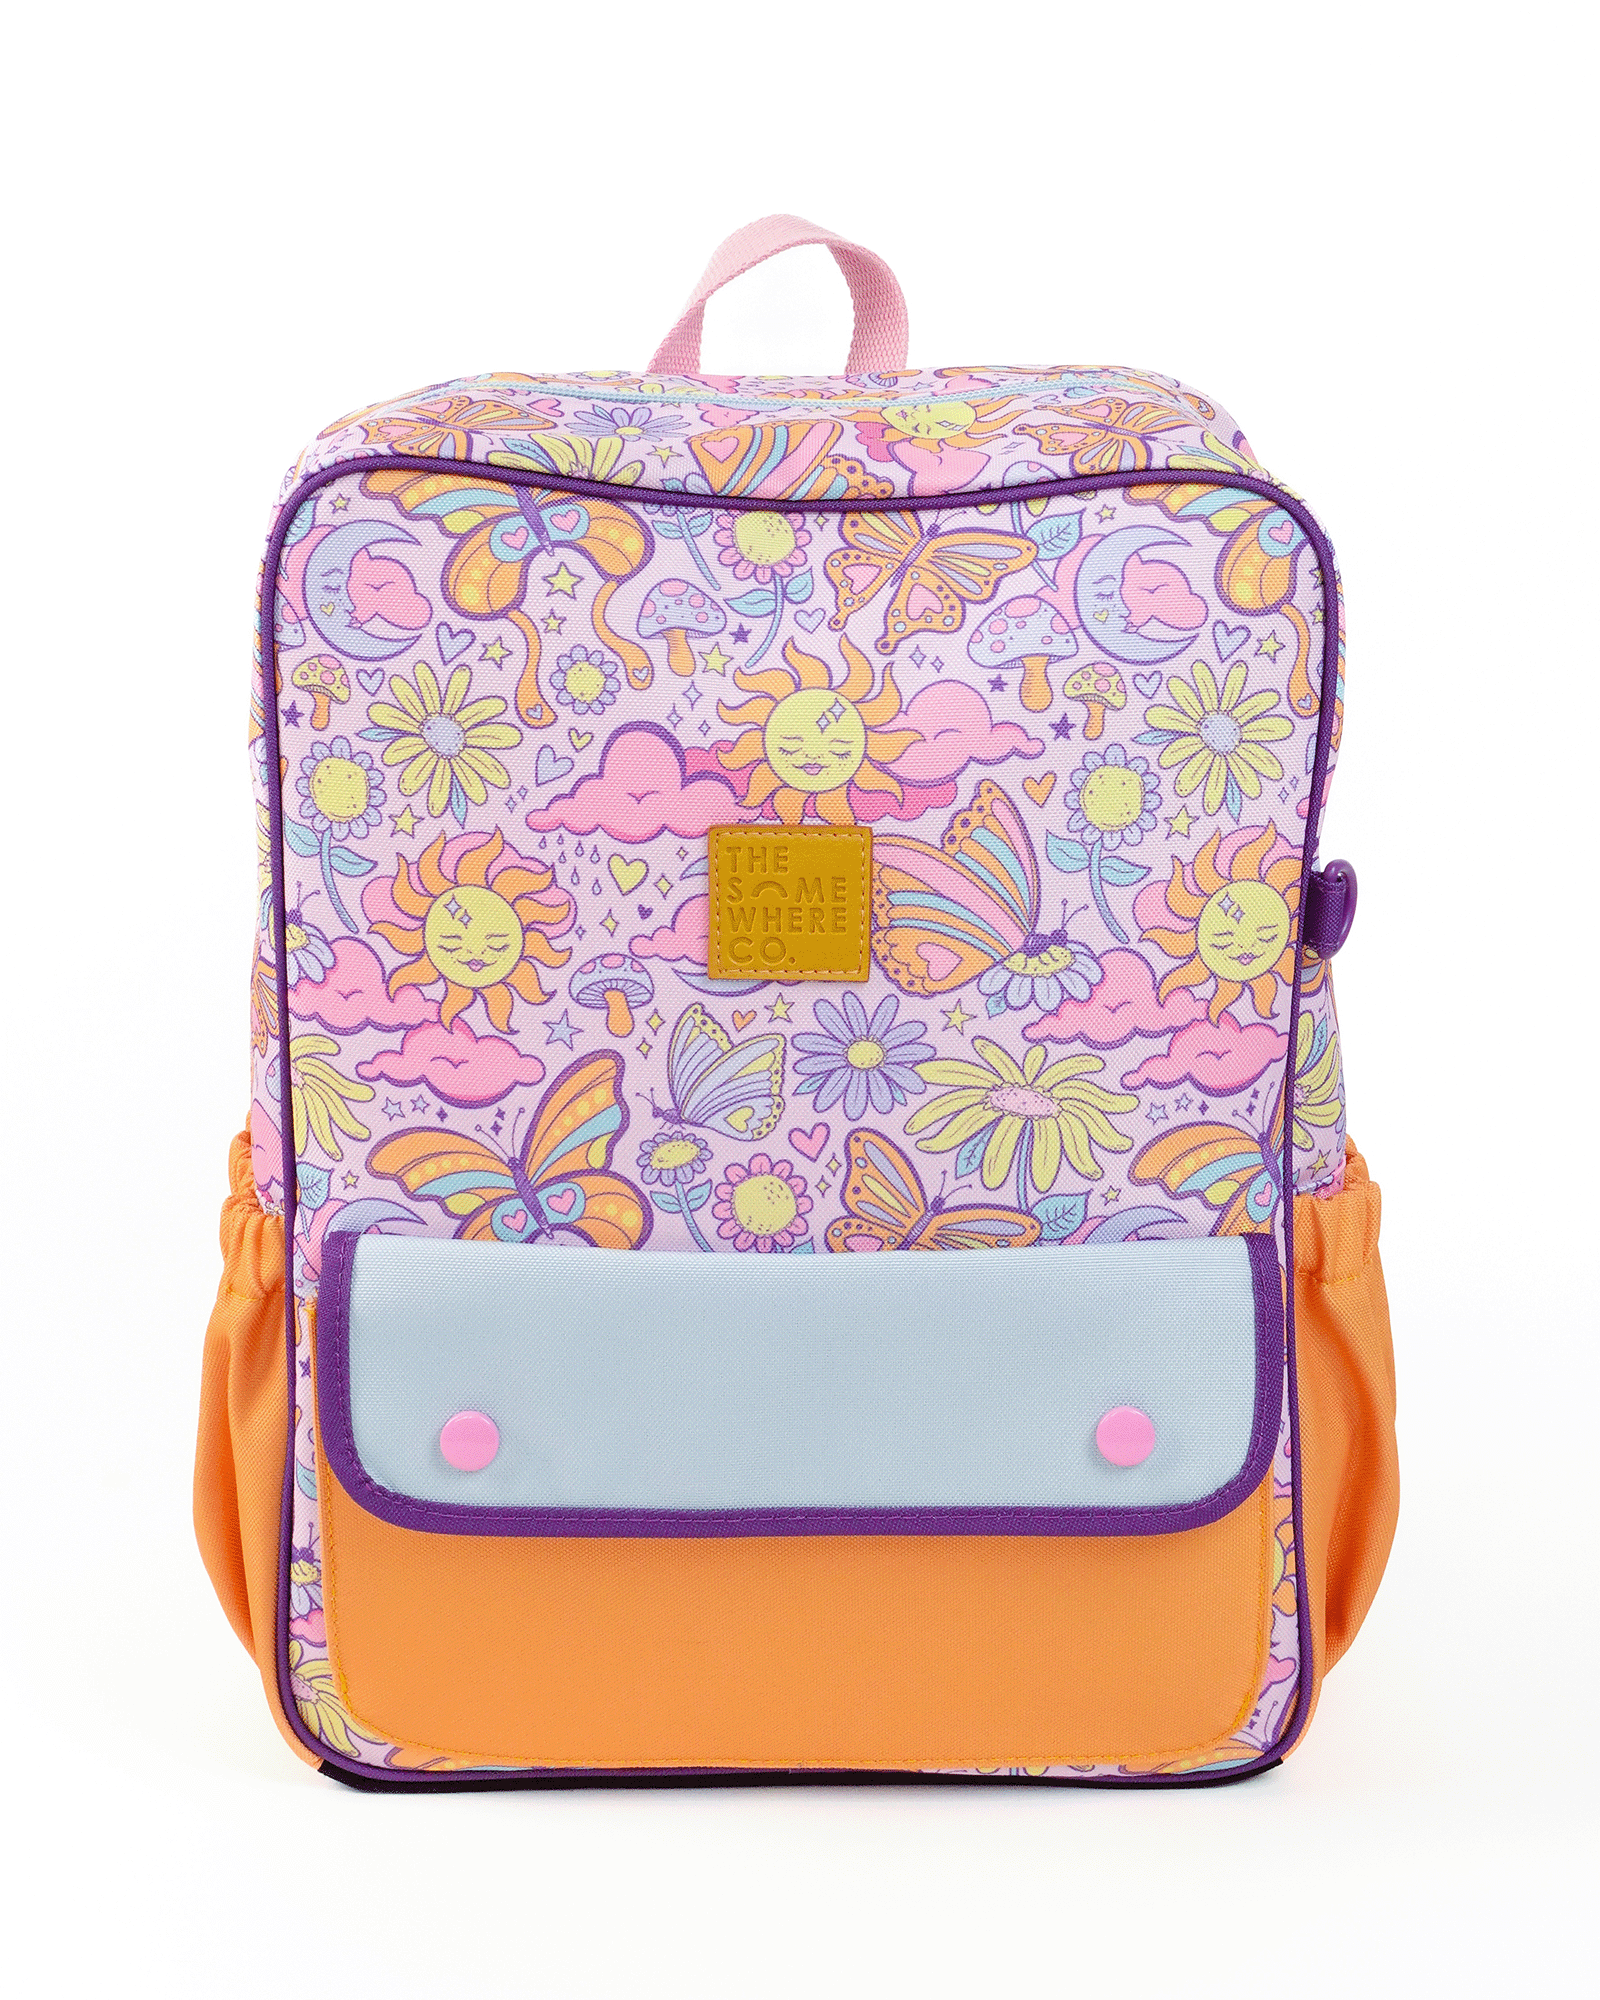 The New Aphmau Round Lunch Box Lunch Bag Pack For Elementary